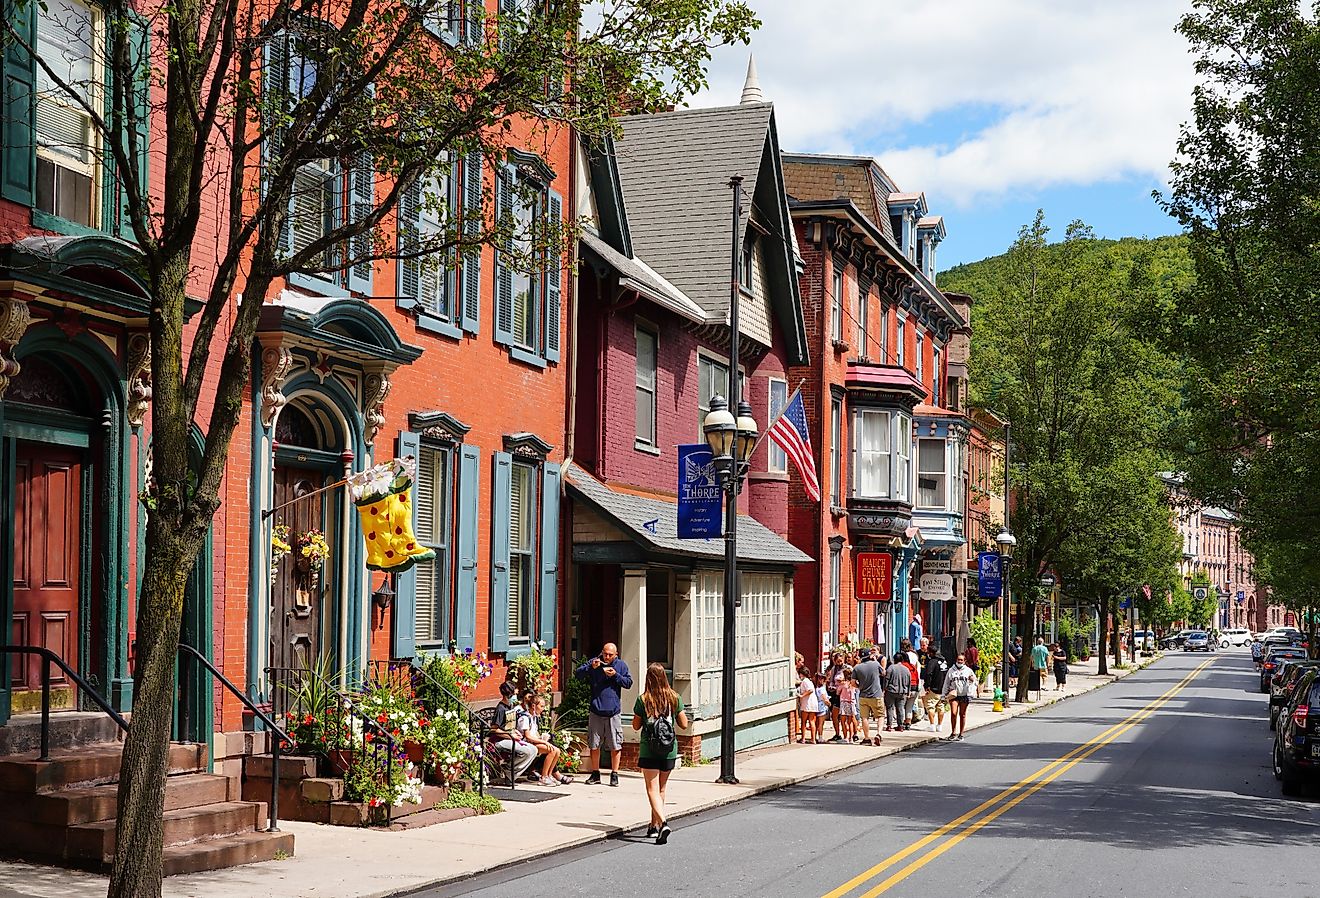 Downtown streets in the historic town of Jim Thorpe, Pennsylvania. Image credit EQRoy via Shutterstock